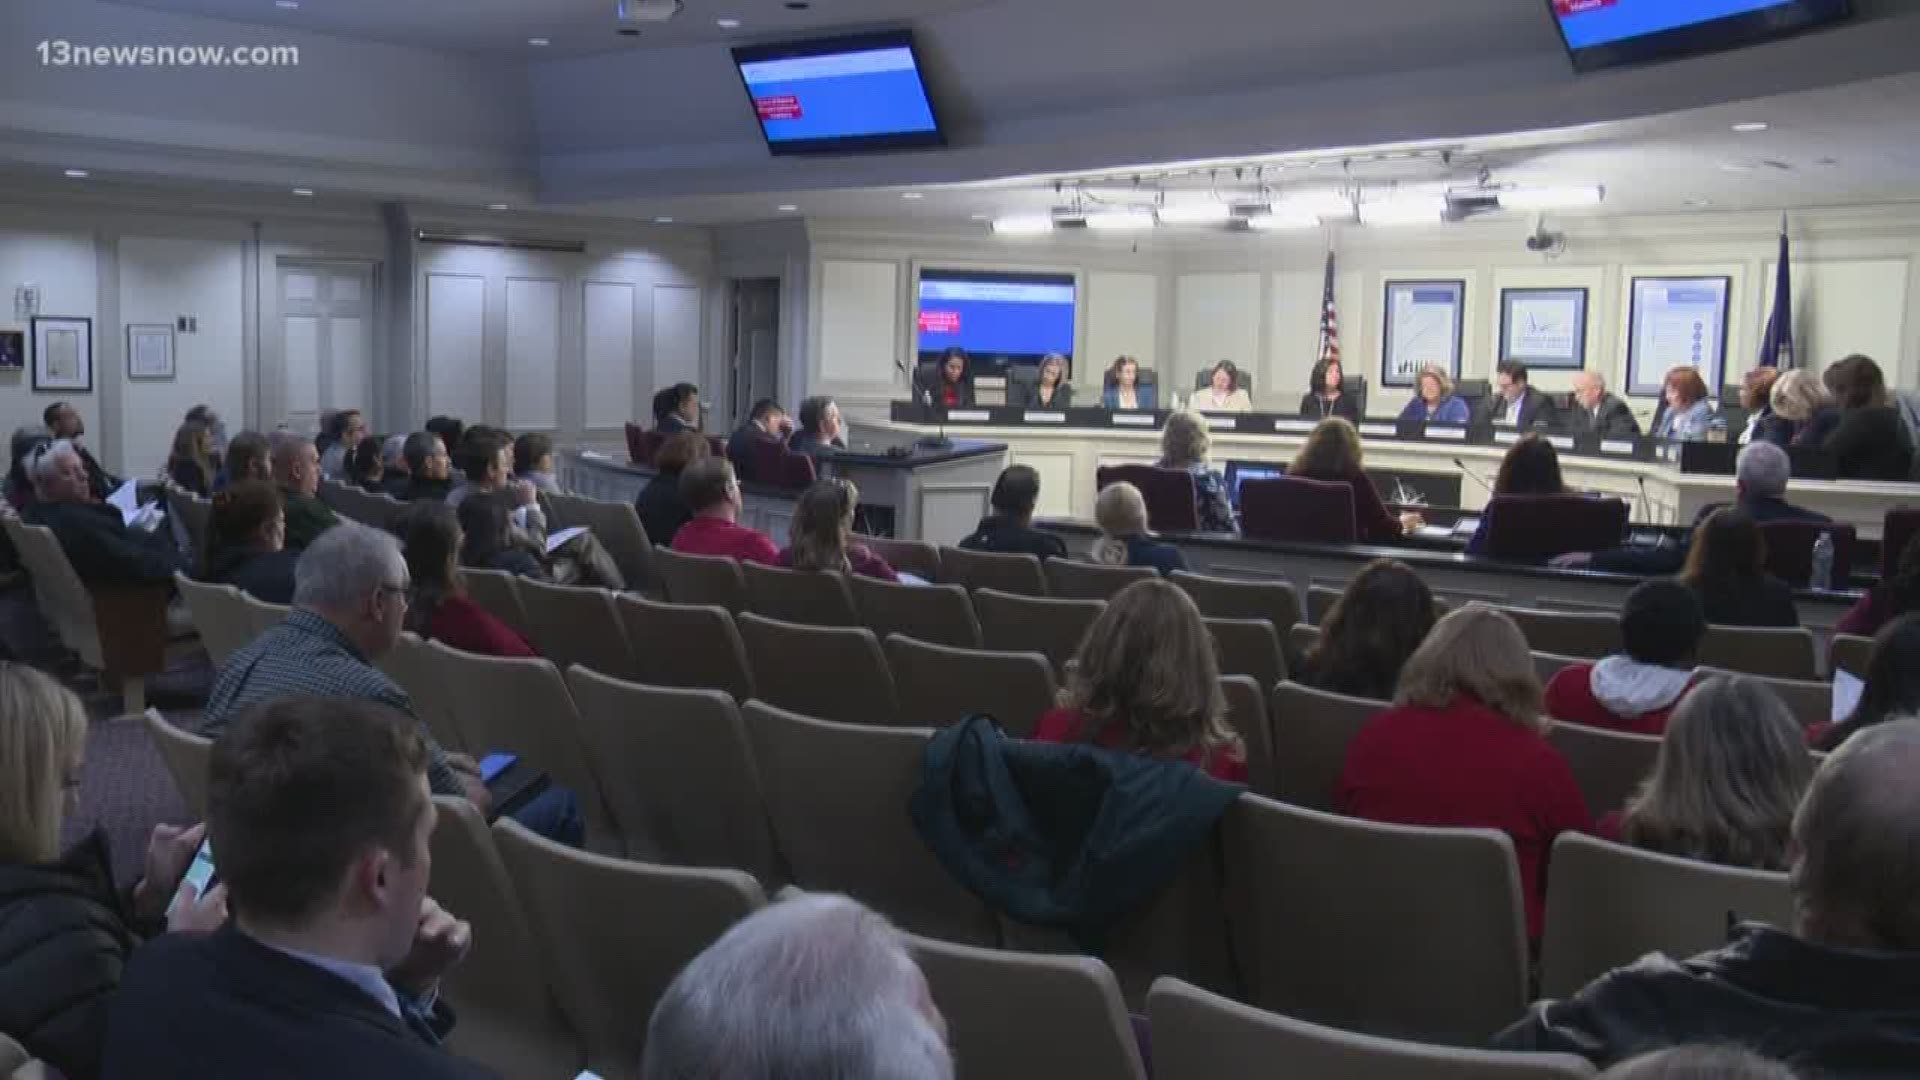 13News Now Ali Weatherton has more on the first school board meeting held since VBCPS Superintendent Aaron Spence's wife made a political post on social media.